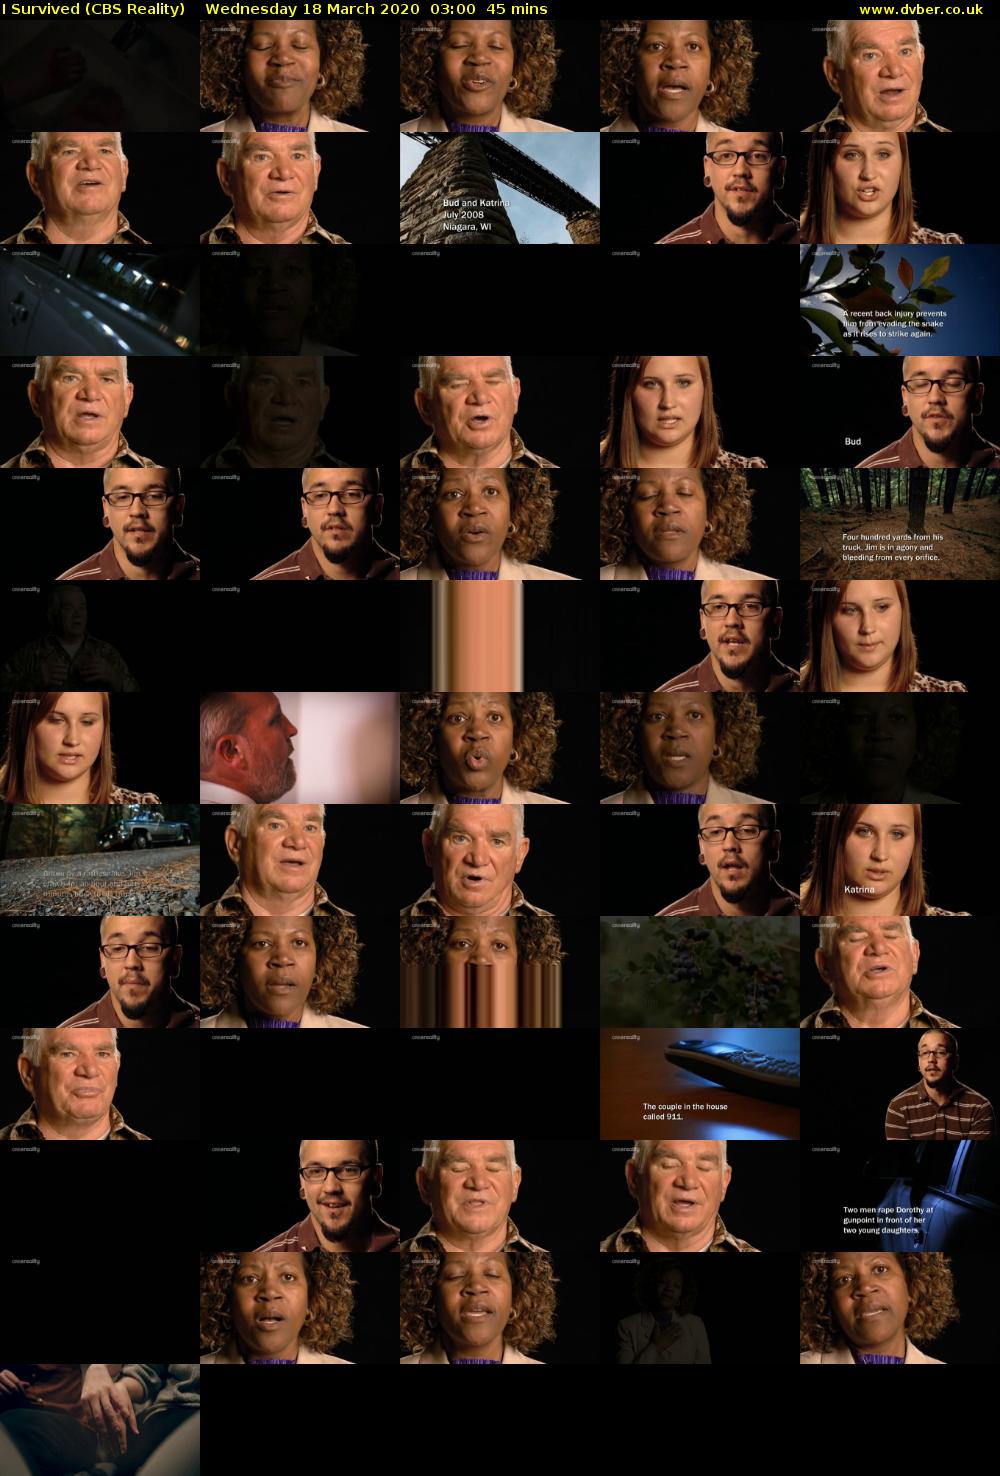 I Survived (CBS Reality) Wednesday 18 March 2020 03:00 - 03:45